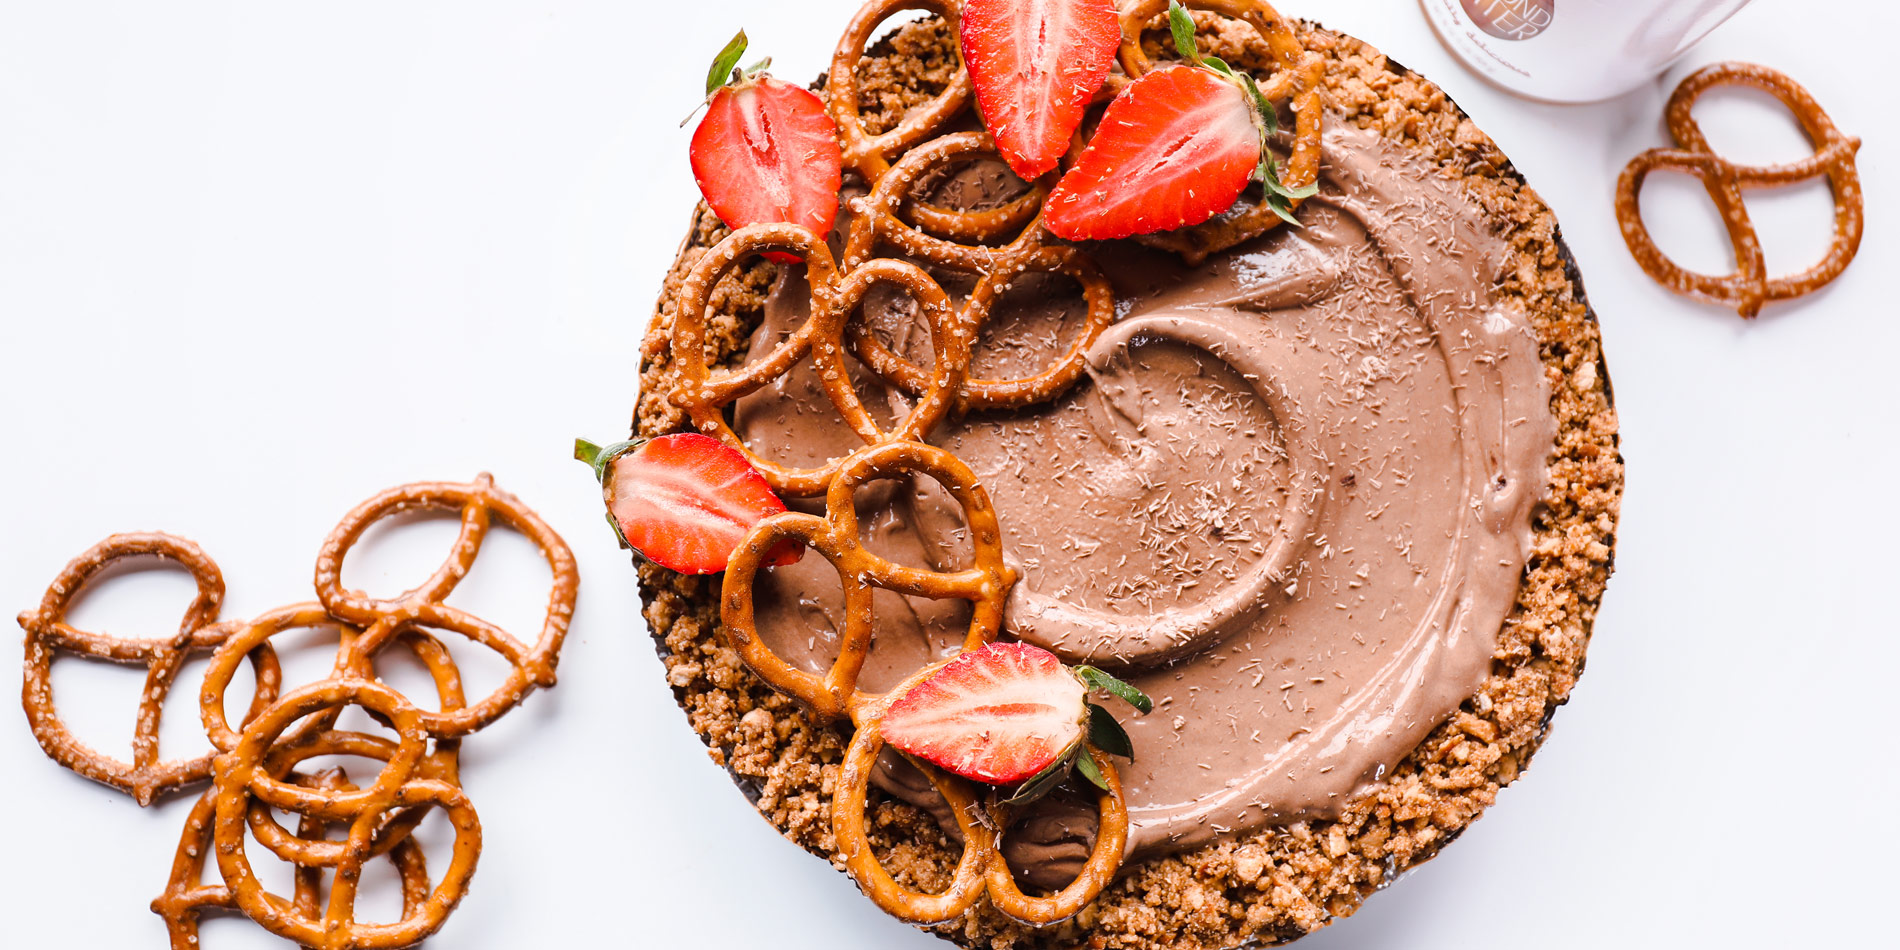 Chocolate Mousse Pie with No Bake Pretzel Almond Butter Pie Crust with strawberry toppings in the white background